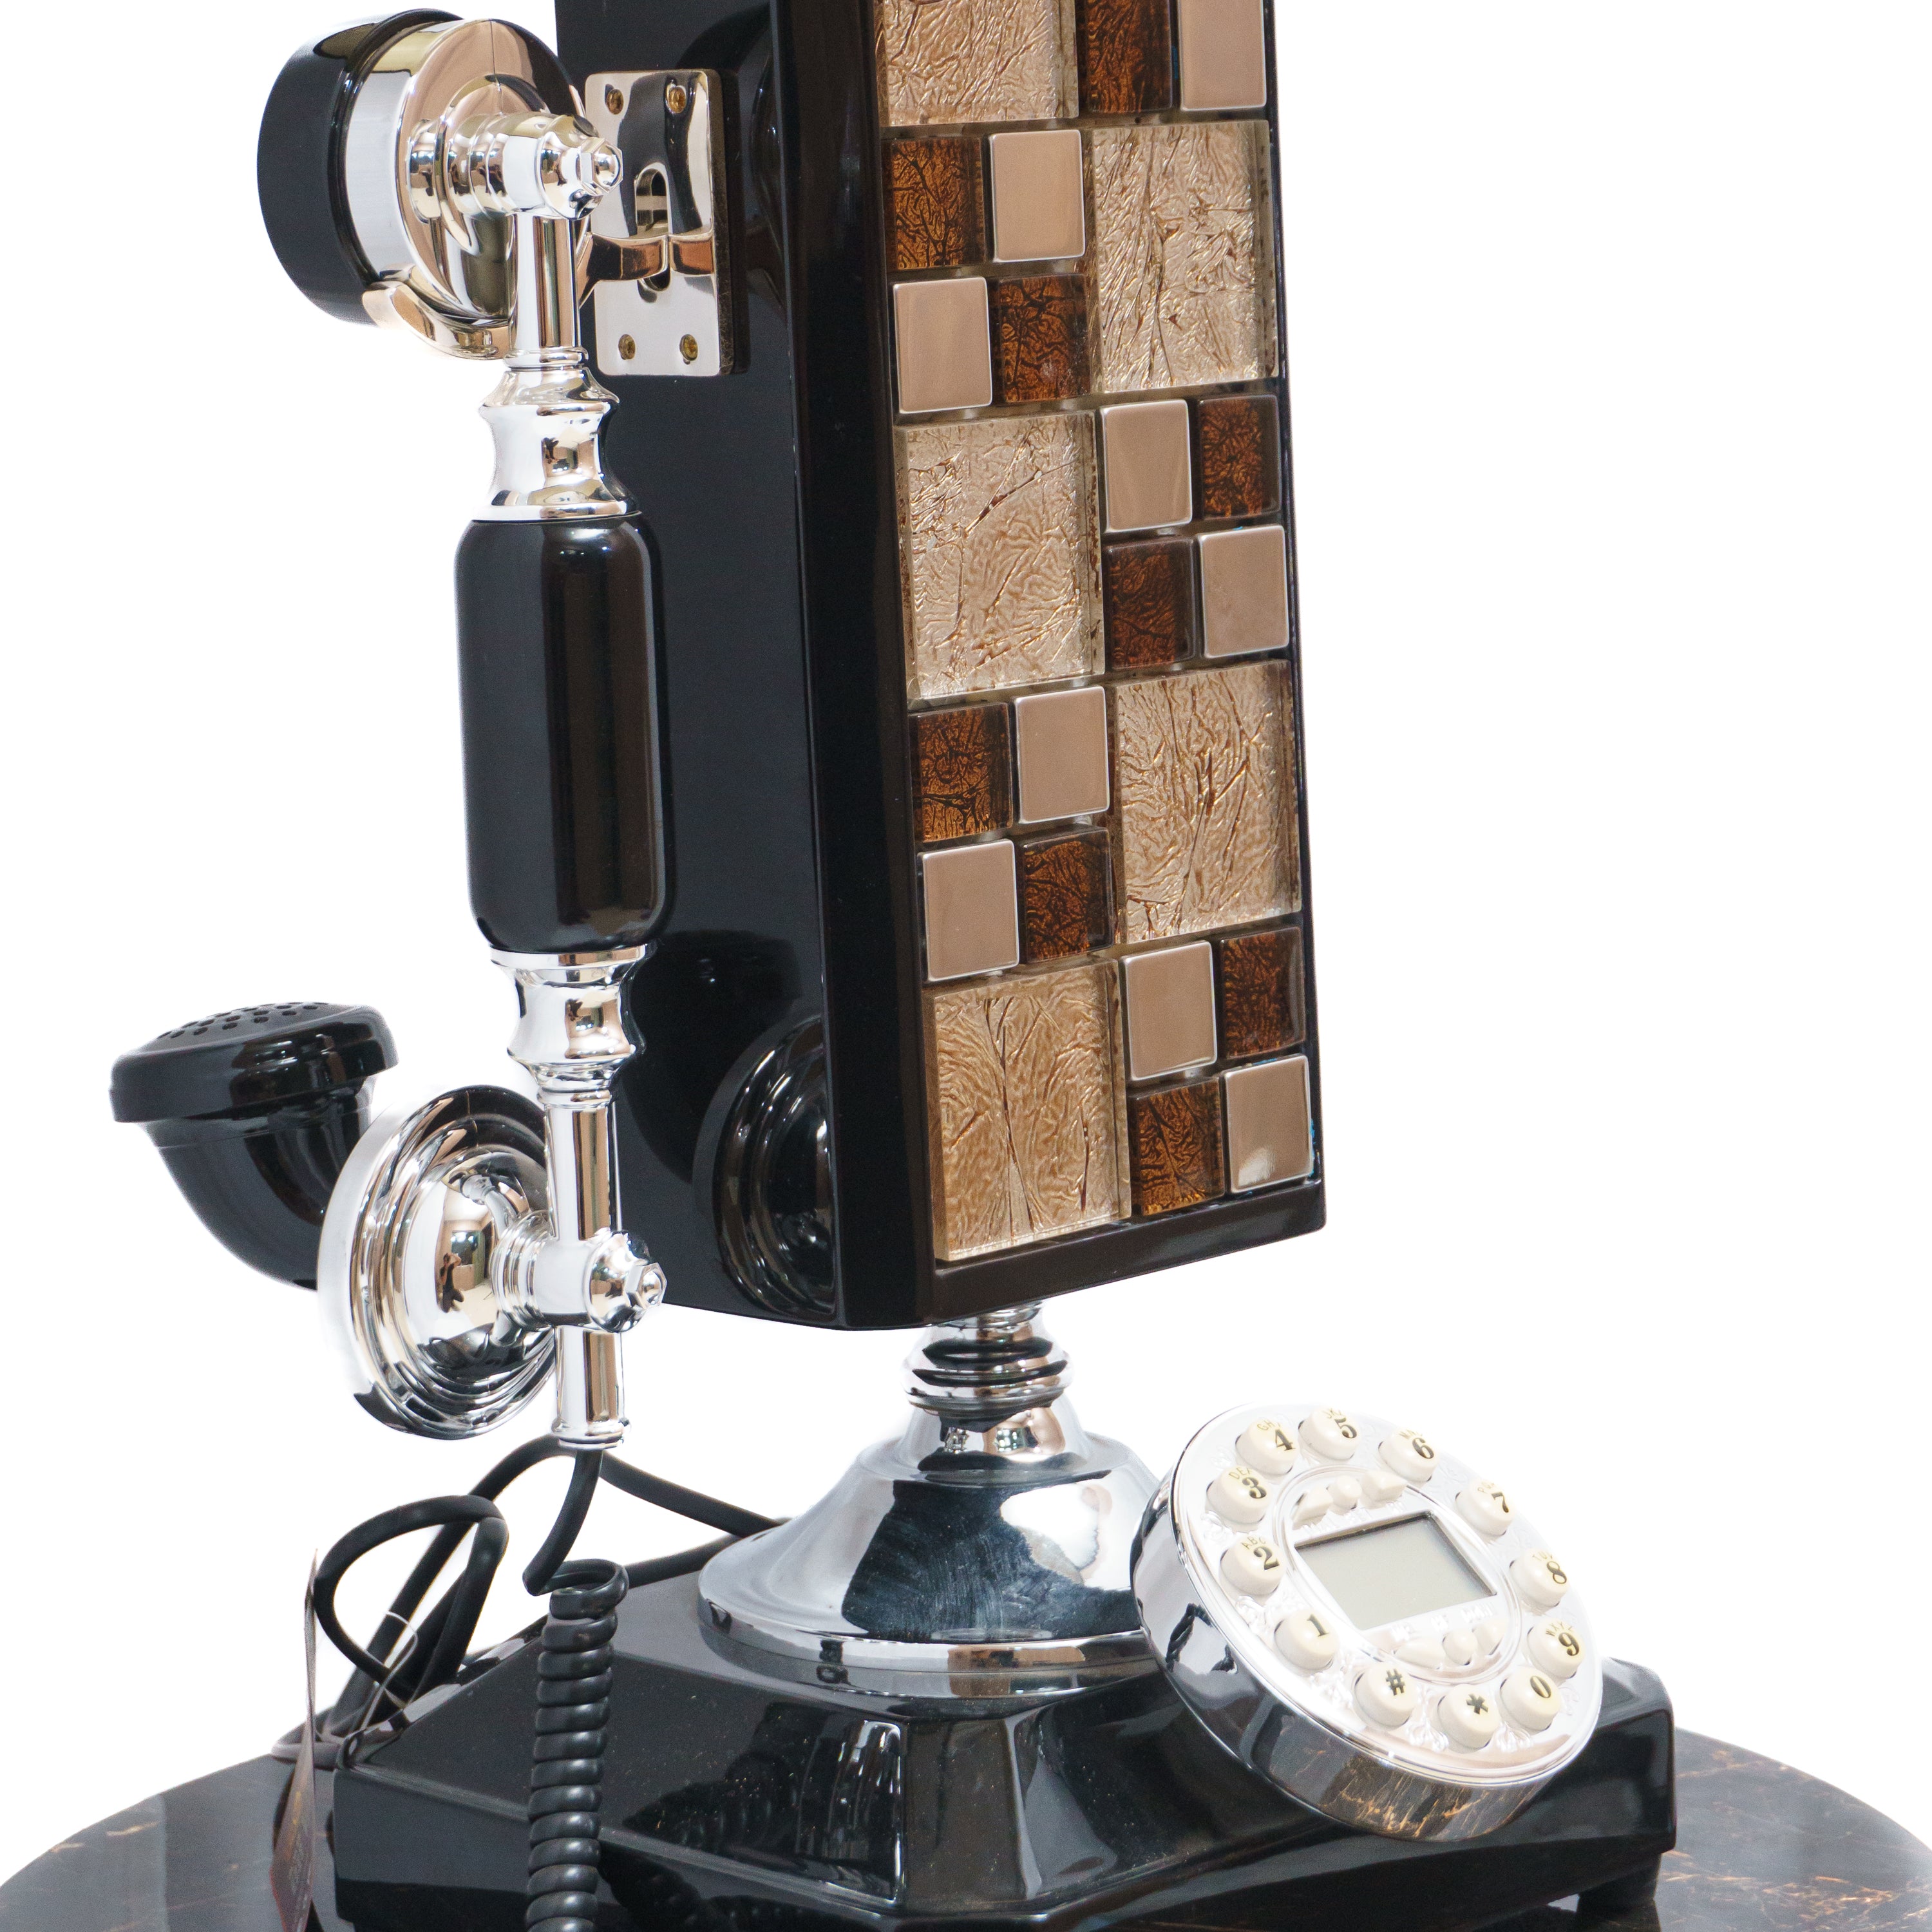 Electric Table Lamp: Wavy Style Shade with Classic Telephone Set and Tile Design Lamp Stand